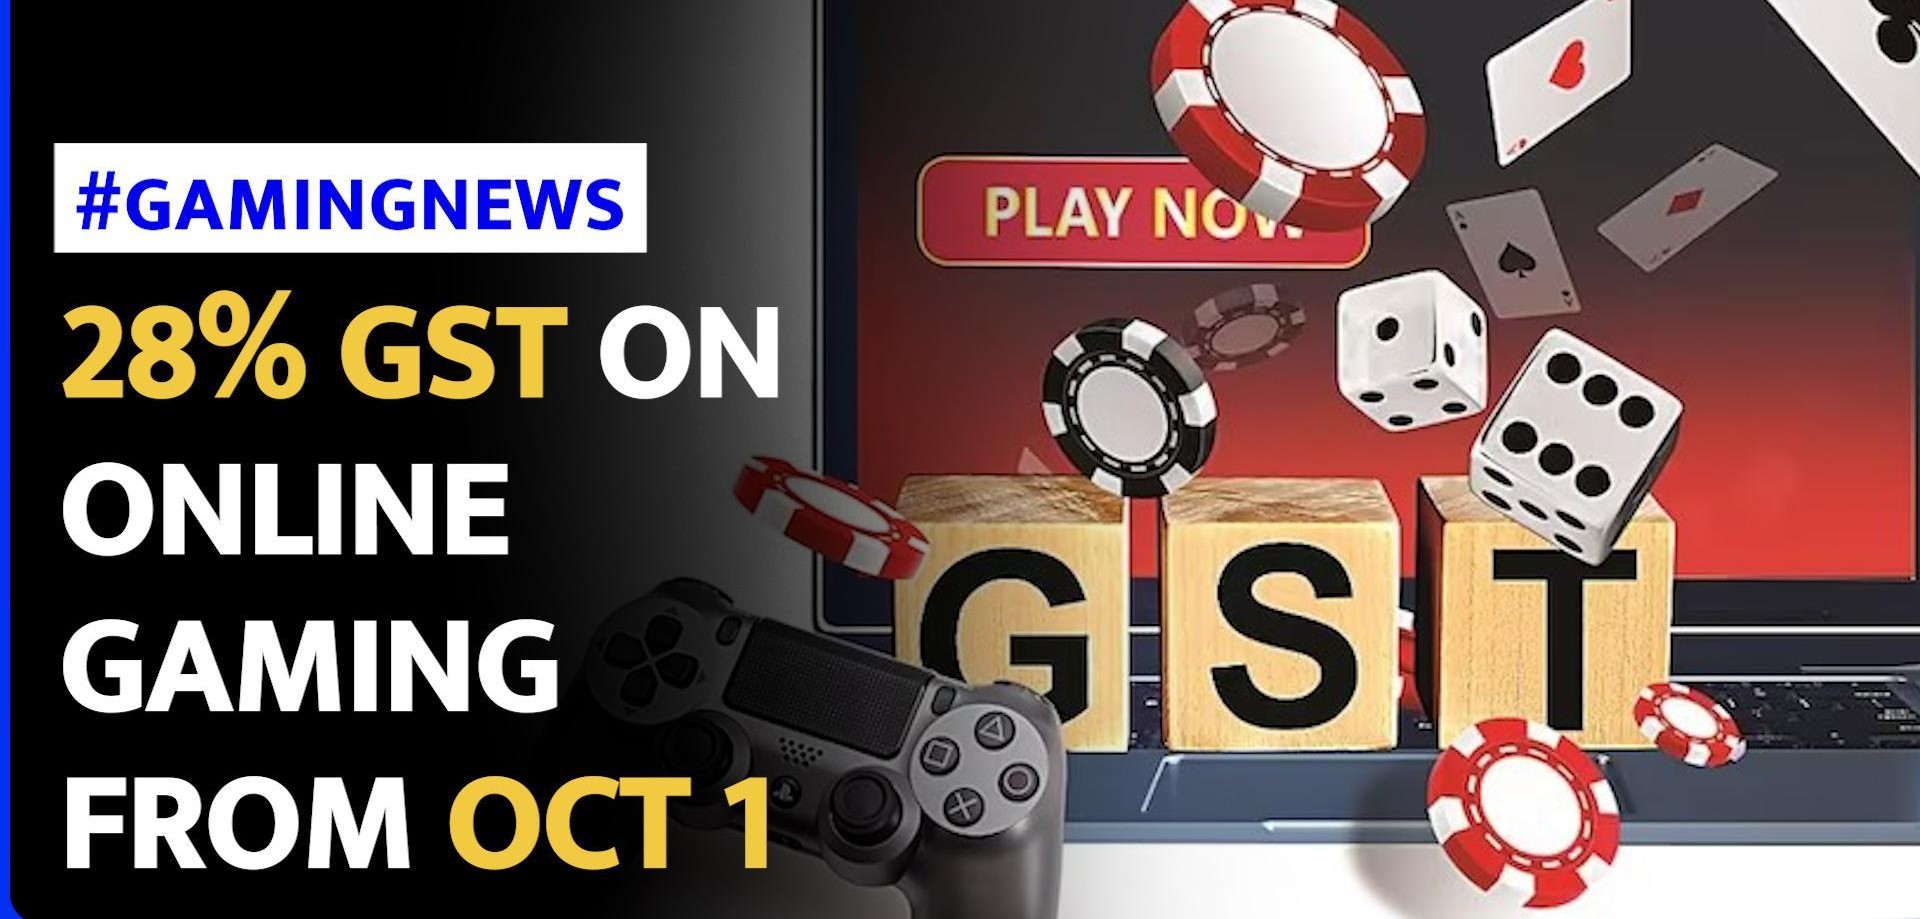 GST on online gaming.